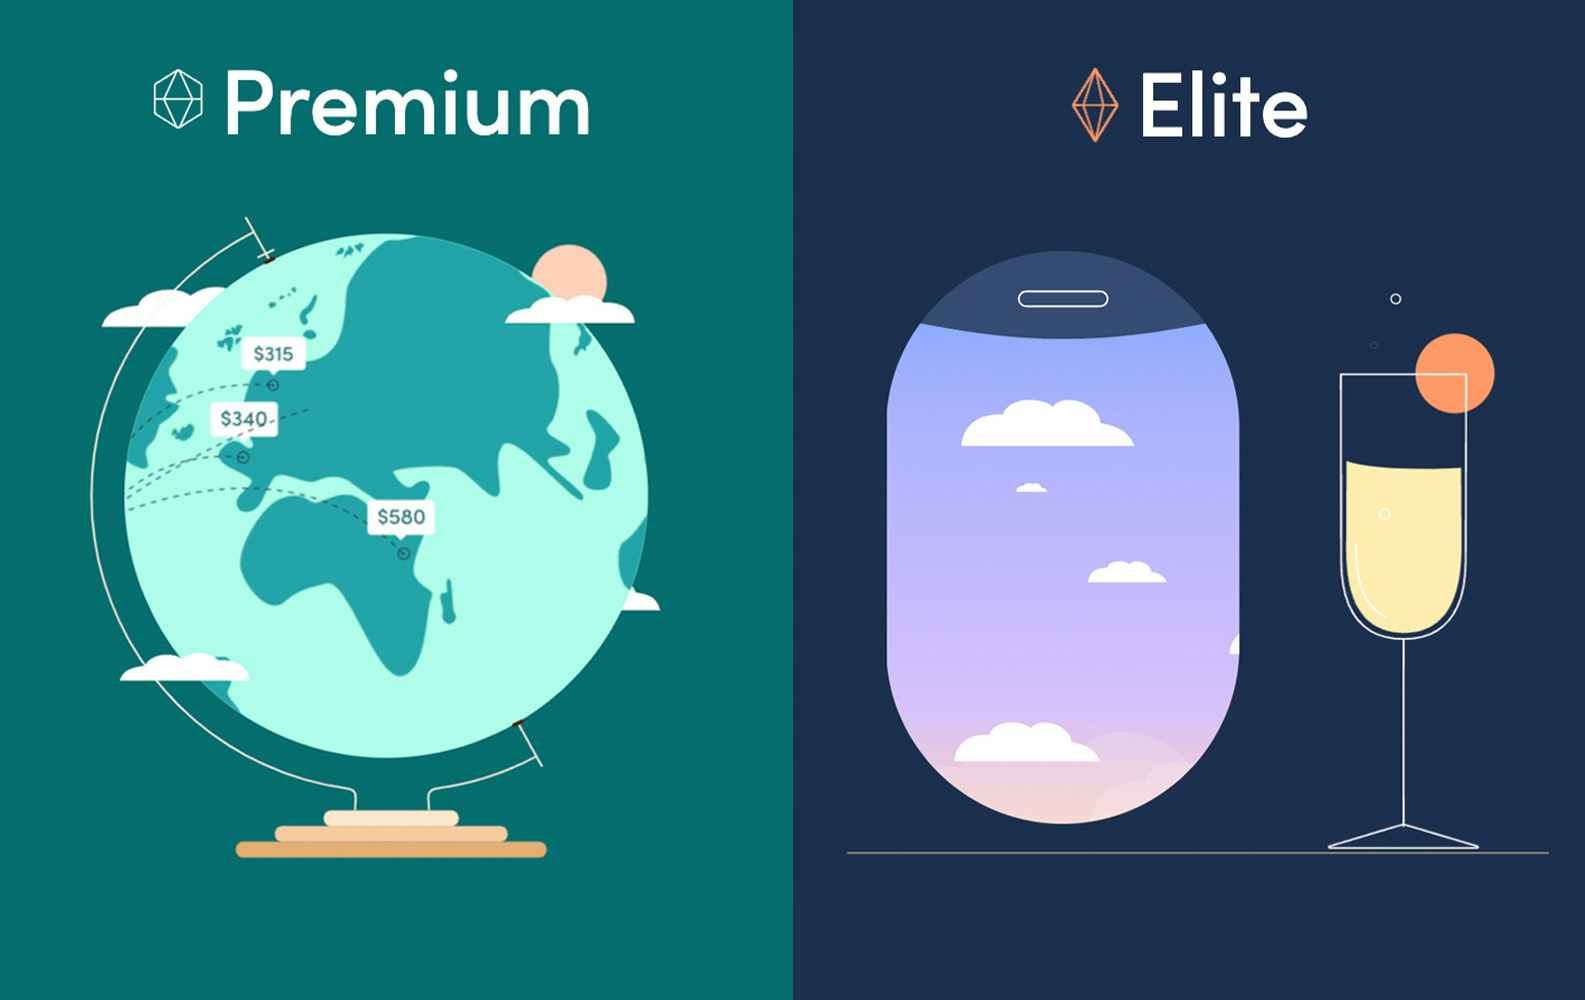 A graphic from the Scott's Cheap Flights website for their Premium and Elite plans